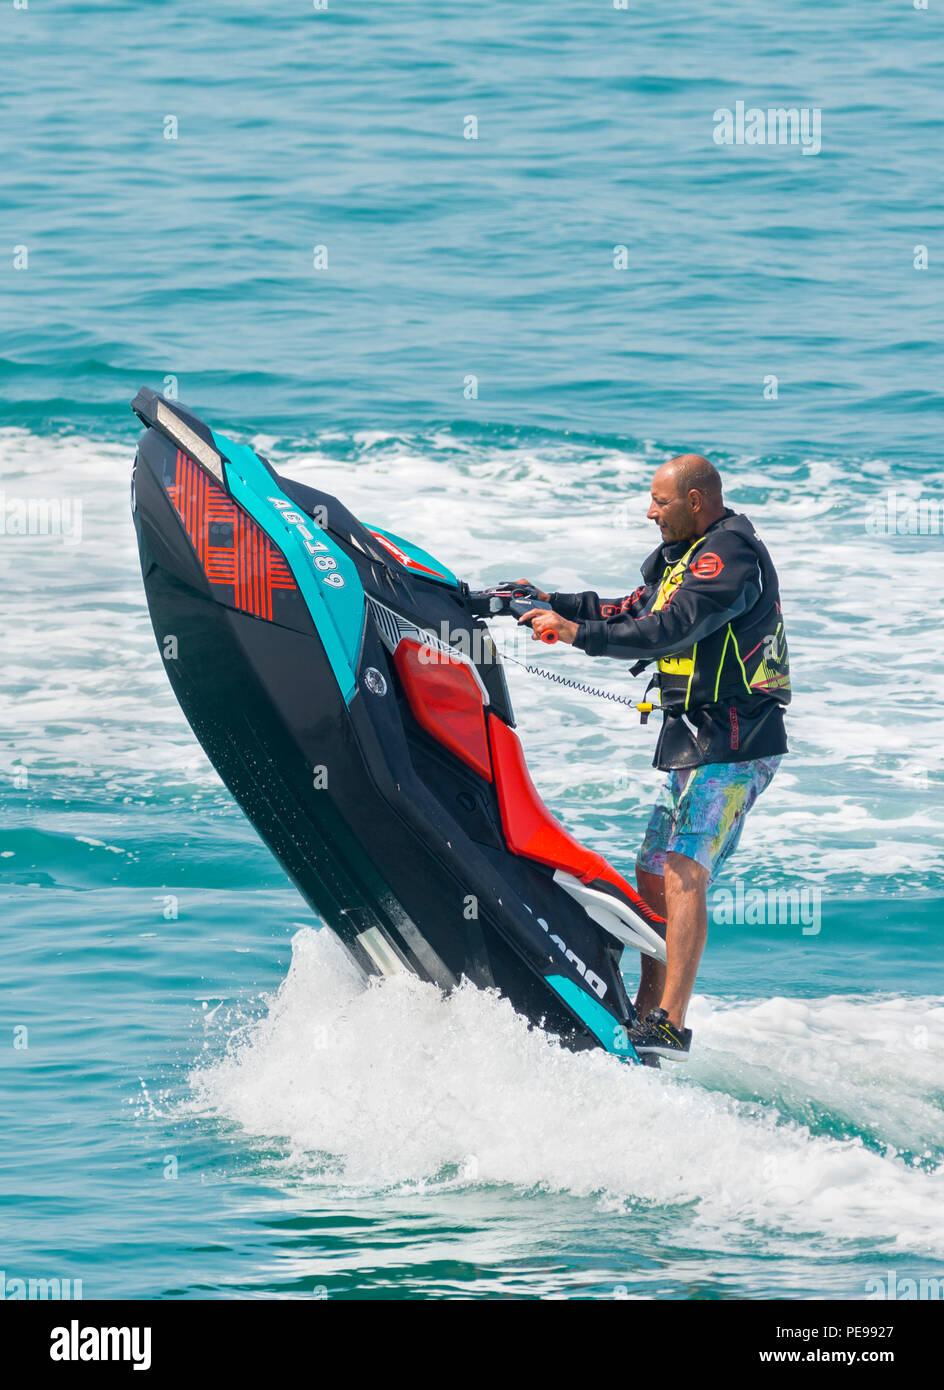 Man riding a jet ski on the sea in Summer in the UK, lifting the front up. Jet ski. Jet skiing. Stock Photo